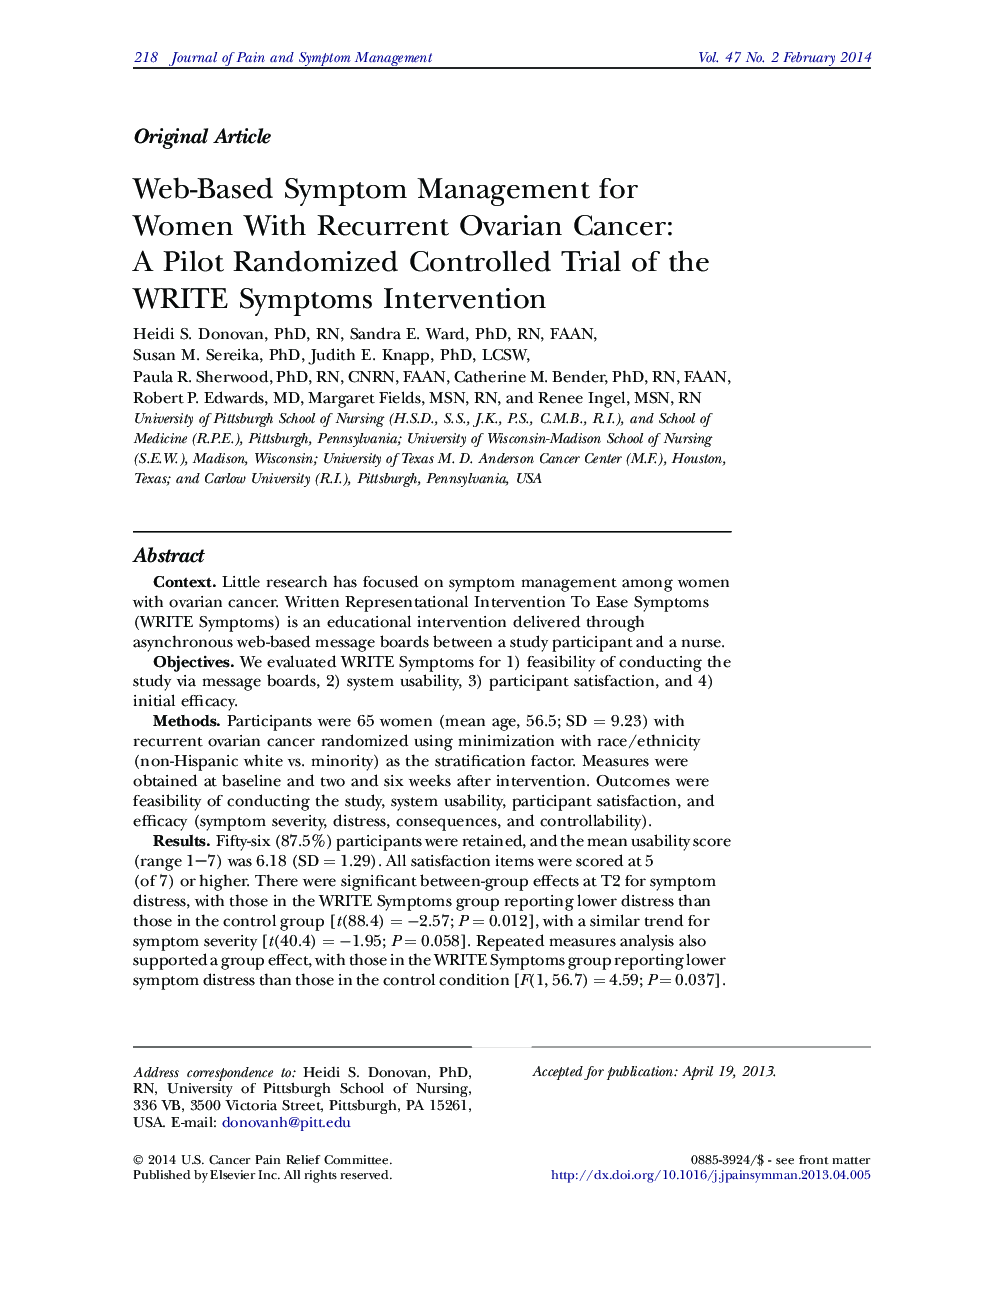 Web-Based Symptom Management for Women With Recurrent Ovarian Cancer: A Pilot Randomized Controlled Trial of the WRITE Symptoms Intervention